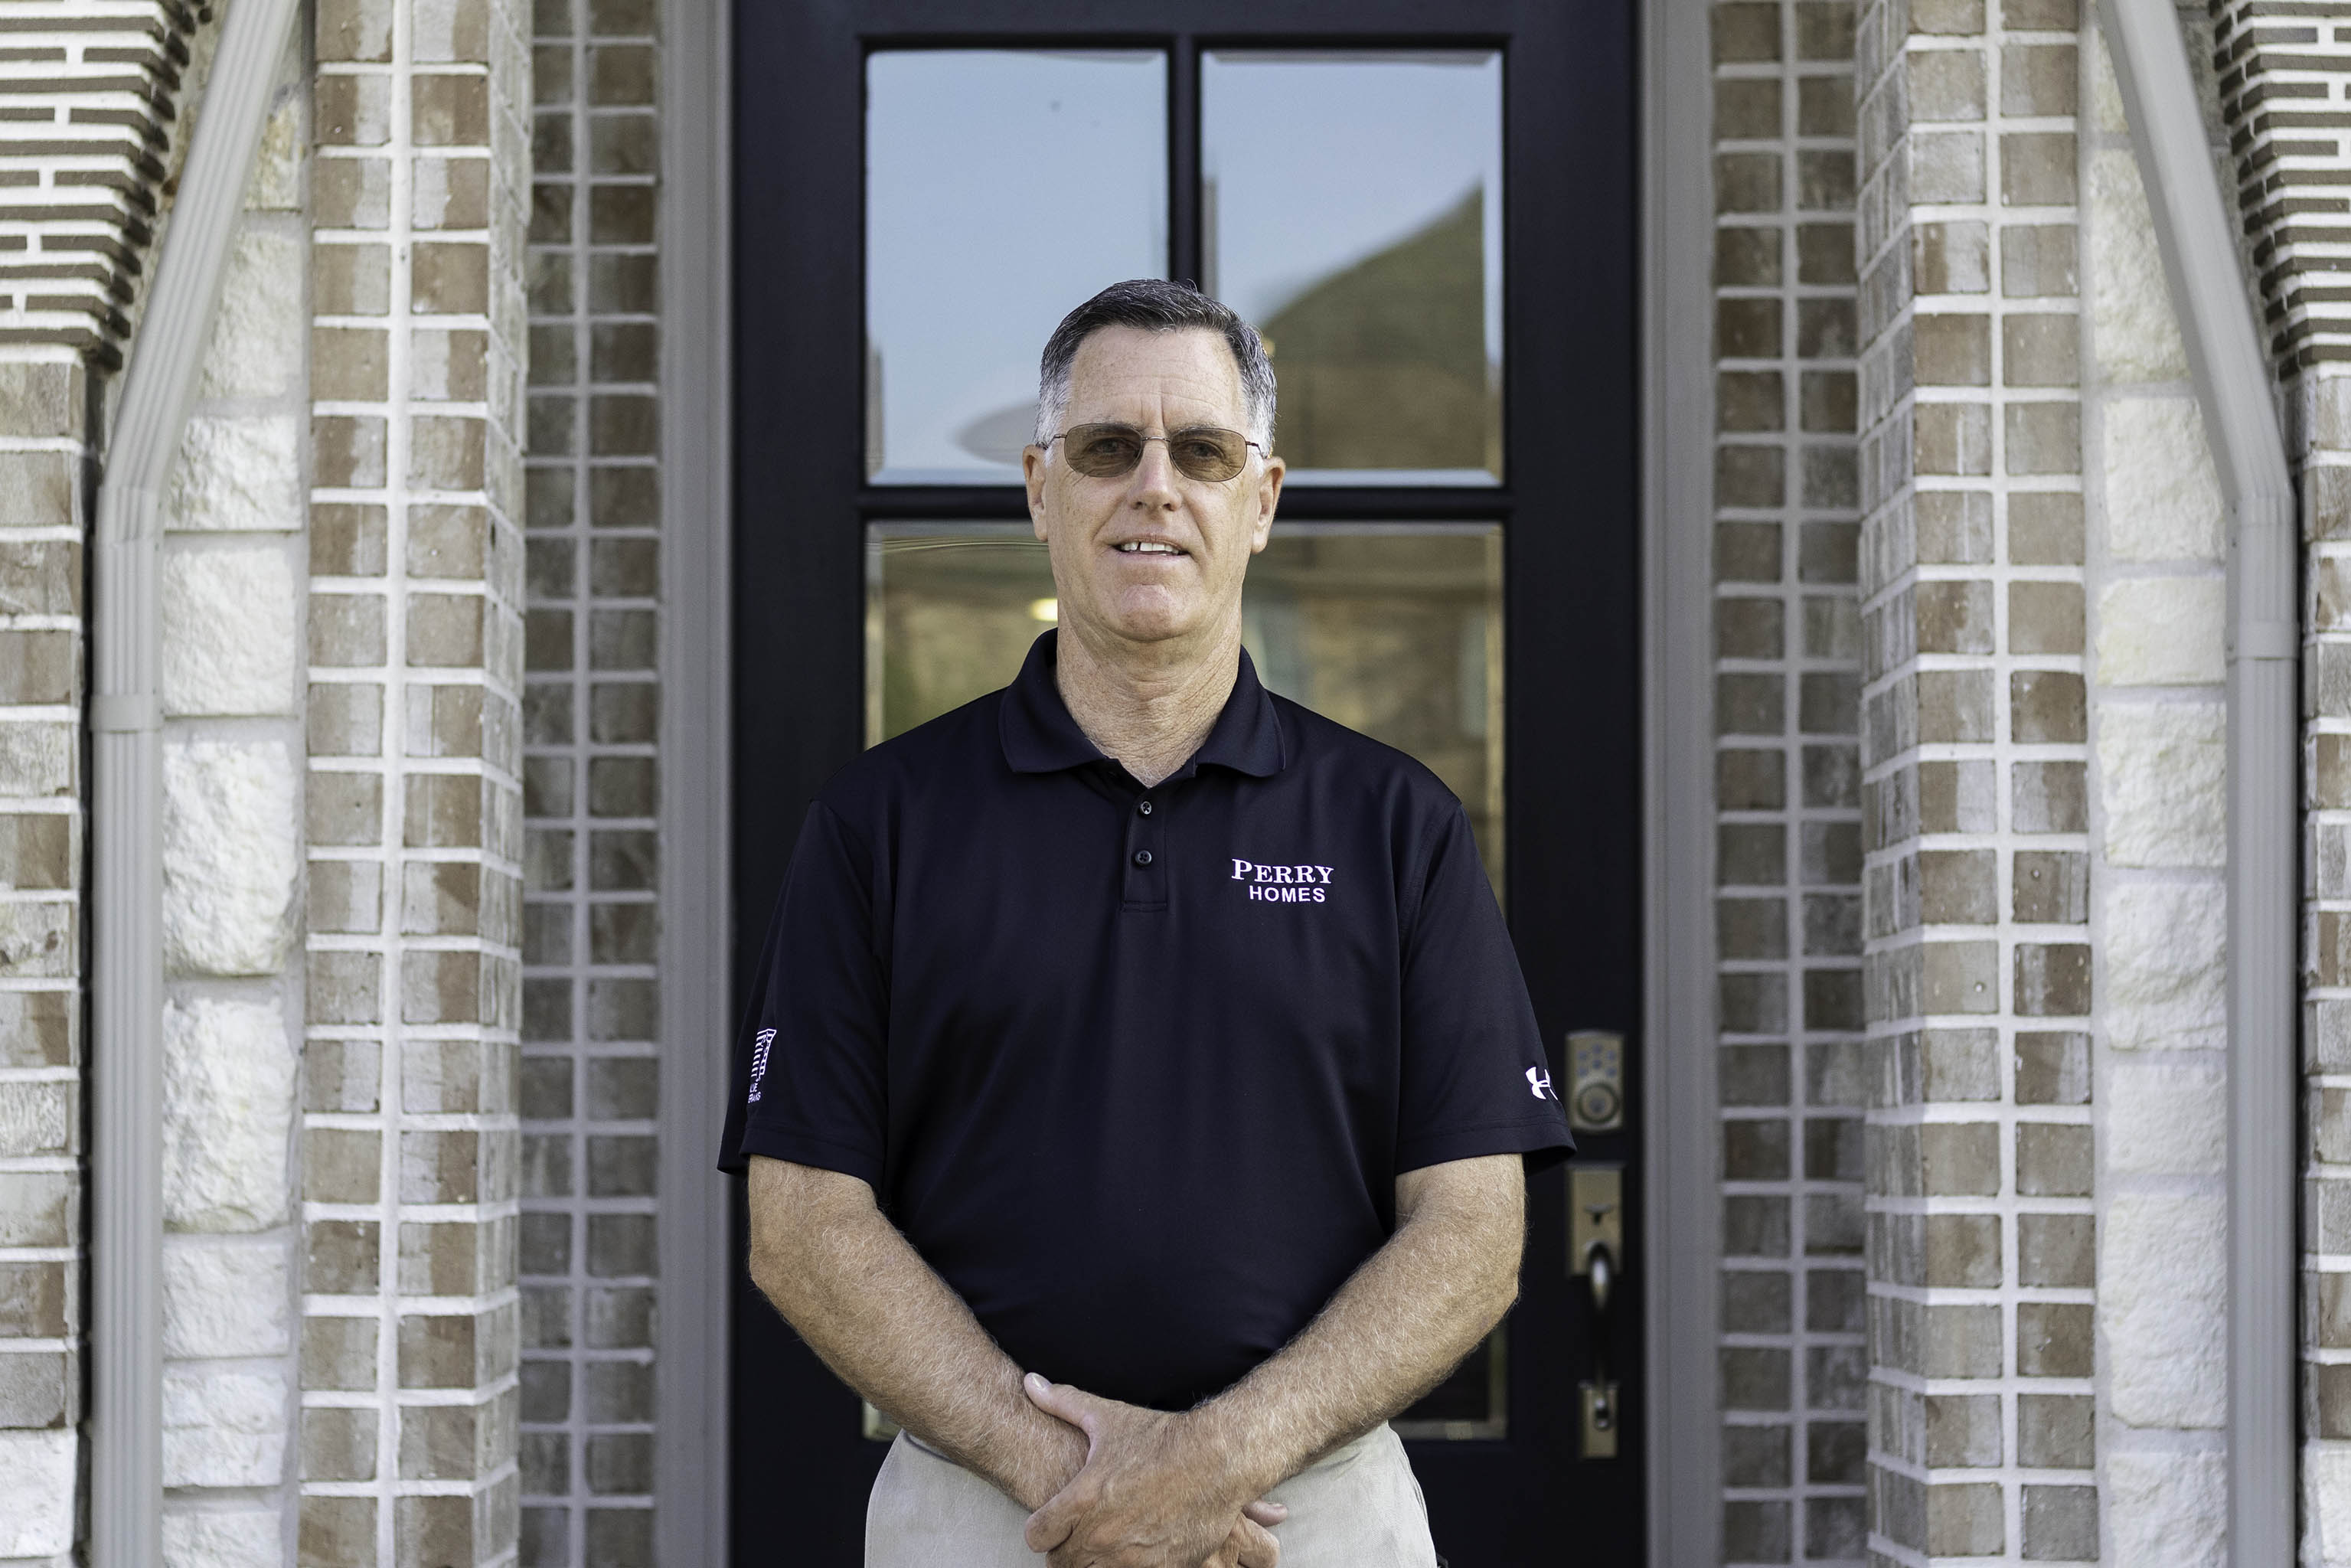 Project manager at Perry Homes, Bruce Smith